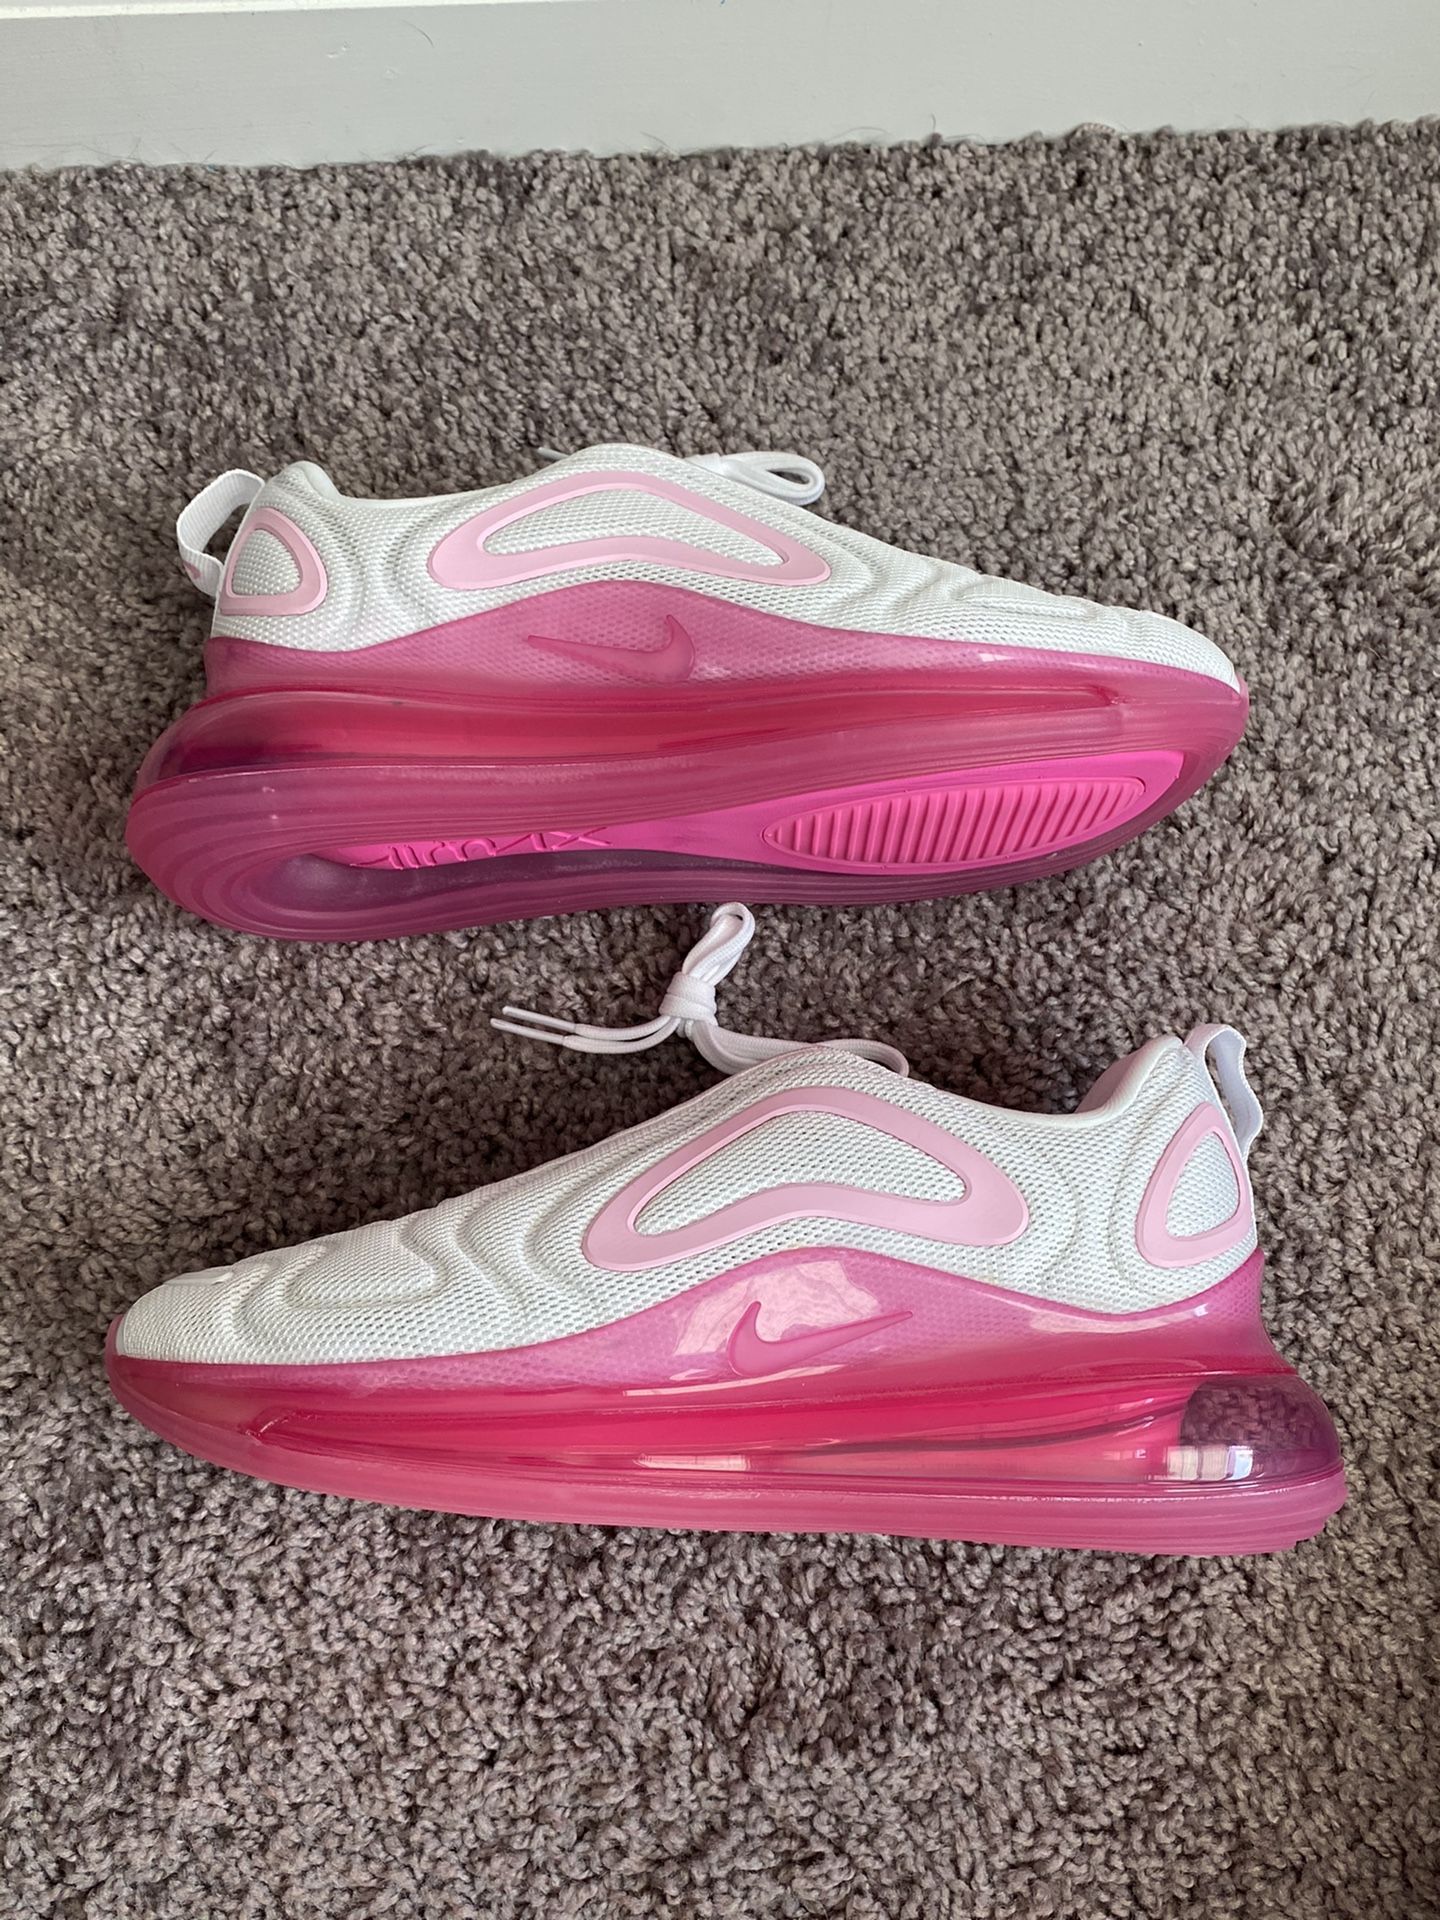 Nike Air Max 720 White Laser Fuchsia Pink Rise Shoes AR9293-103 Womens US Size 8